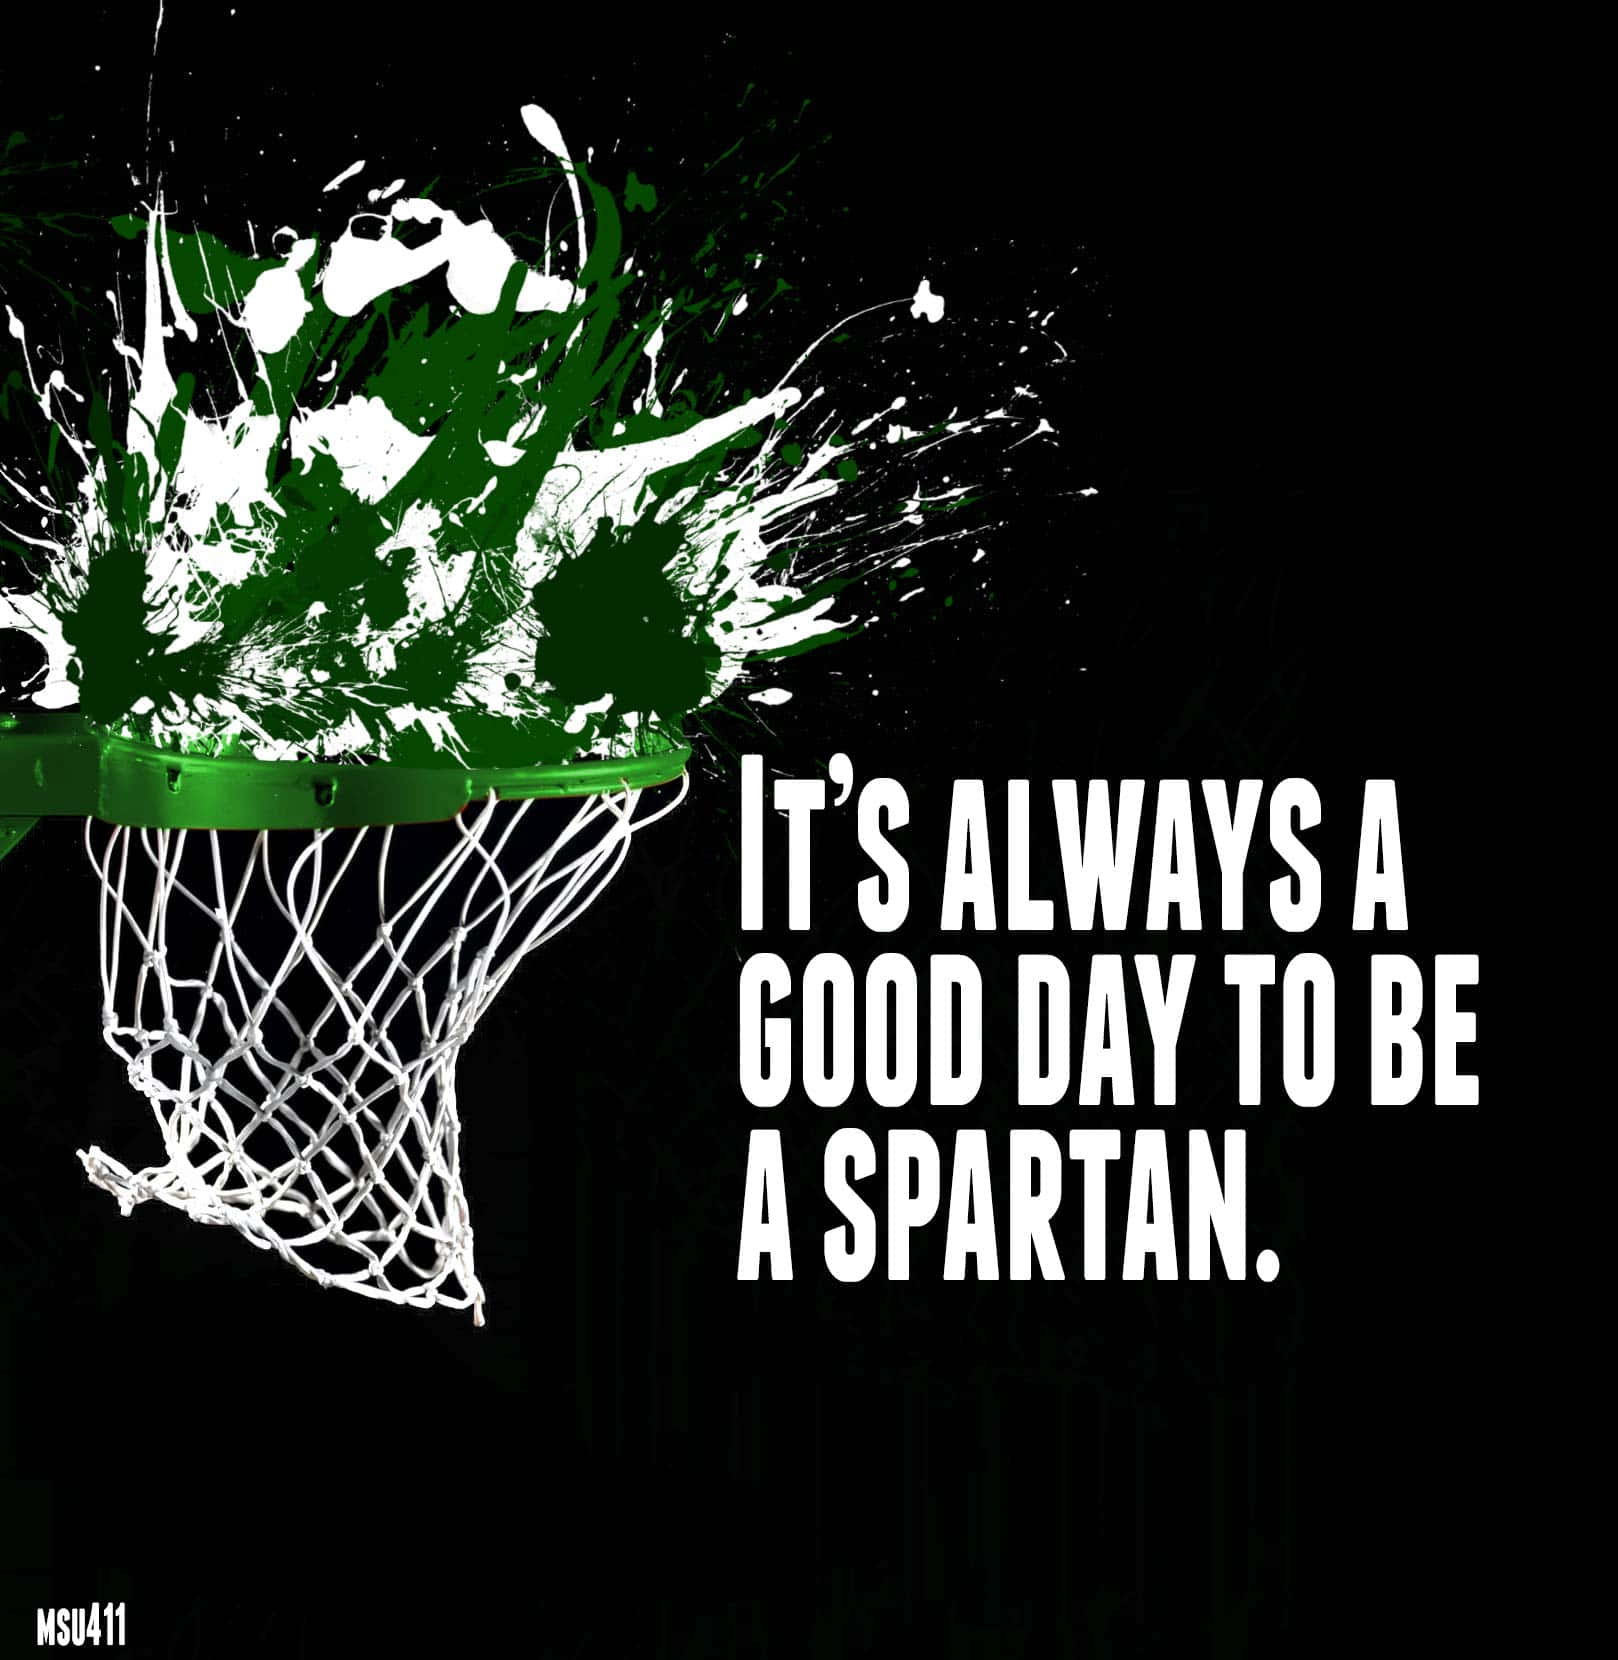 "Go Green, Go White with the Michigan State Spartans" Wallpaper